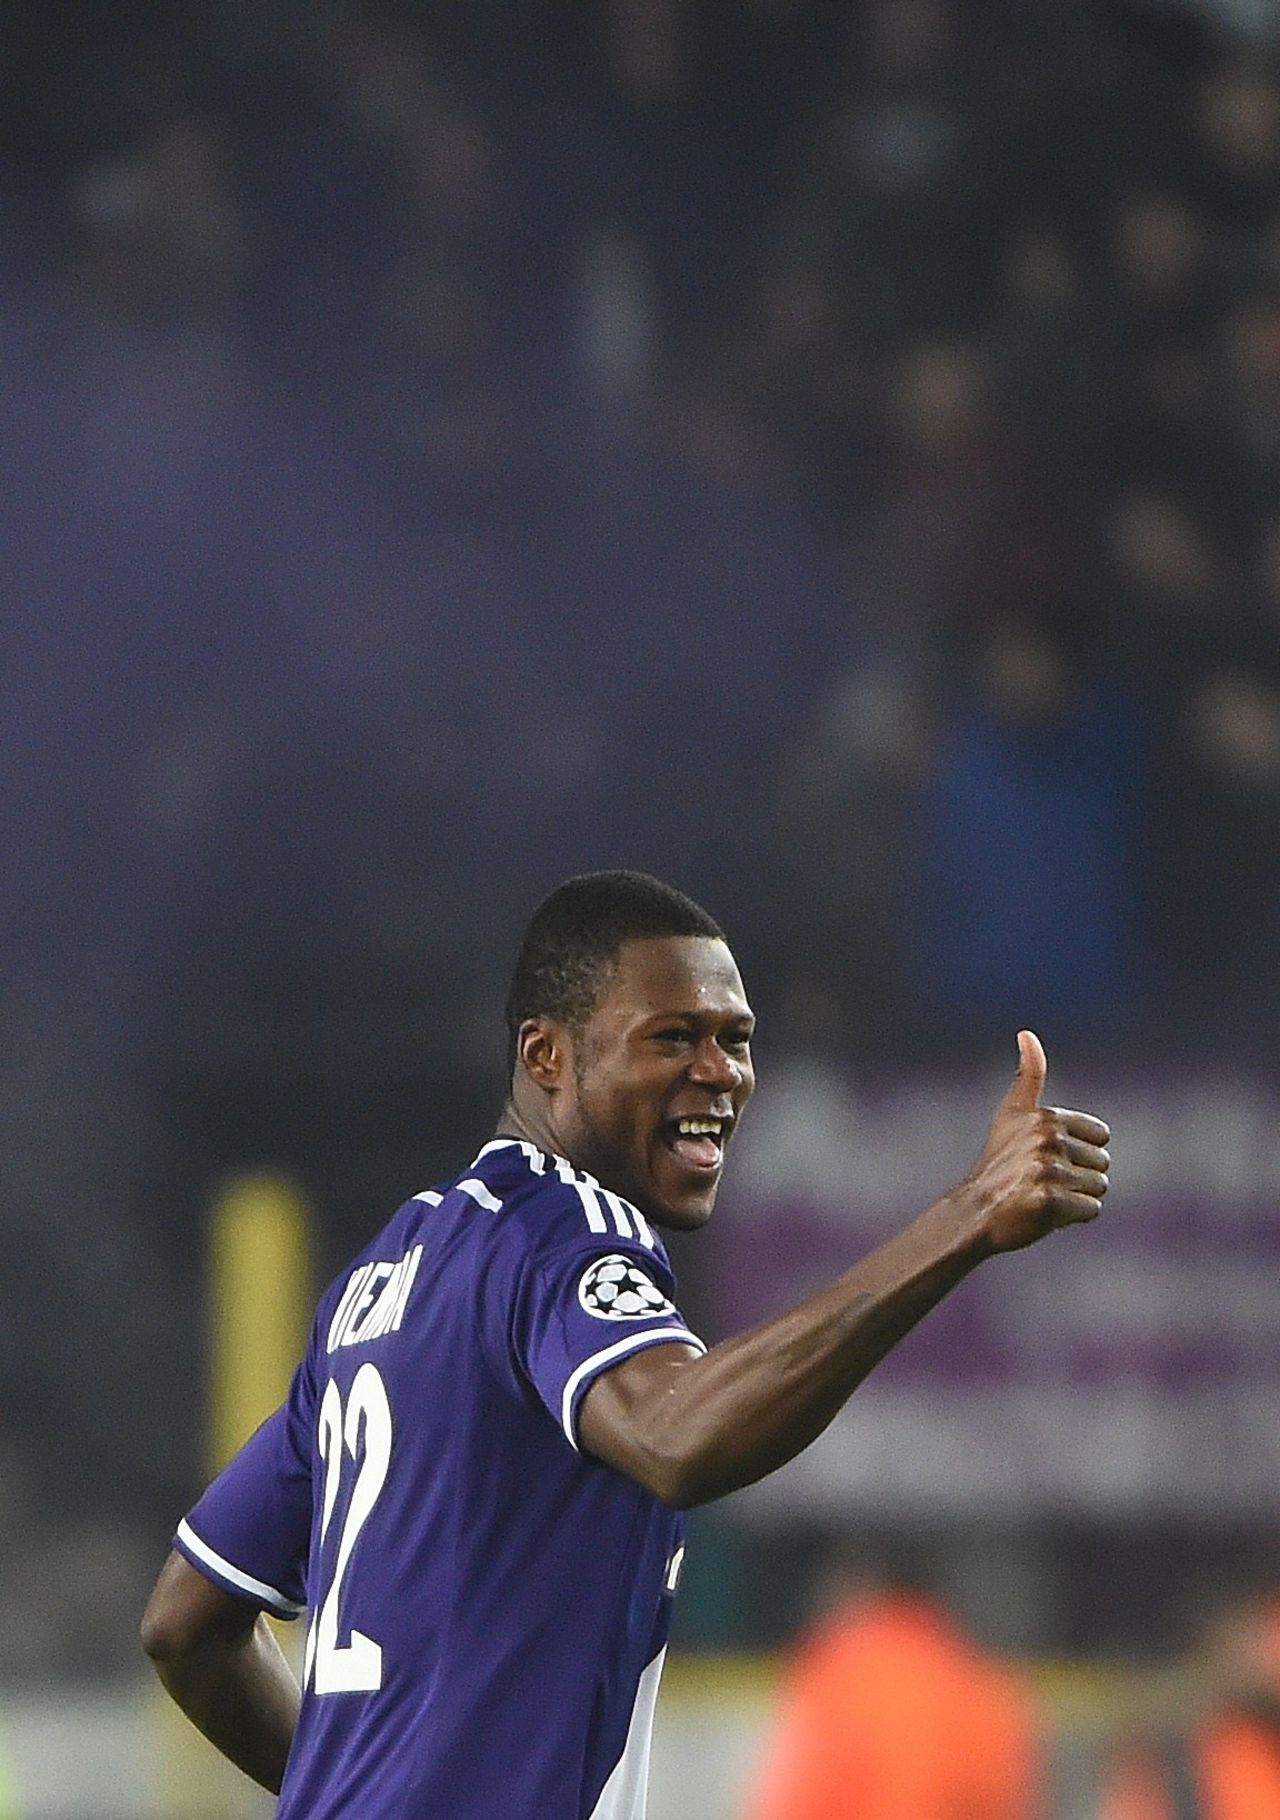 English Premier League club Newcastle has agreed a deal with Belgian club Anderlecht to buy Democratic Republic of Congo international Chancel Mbemba.